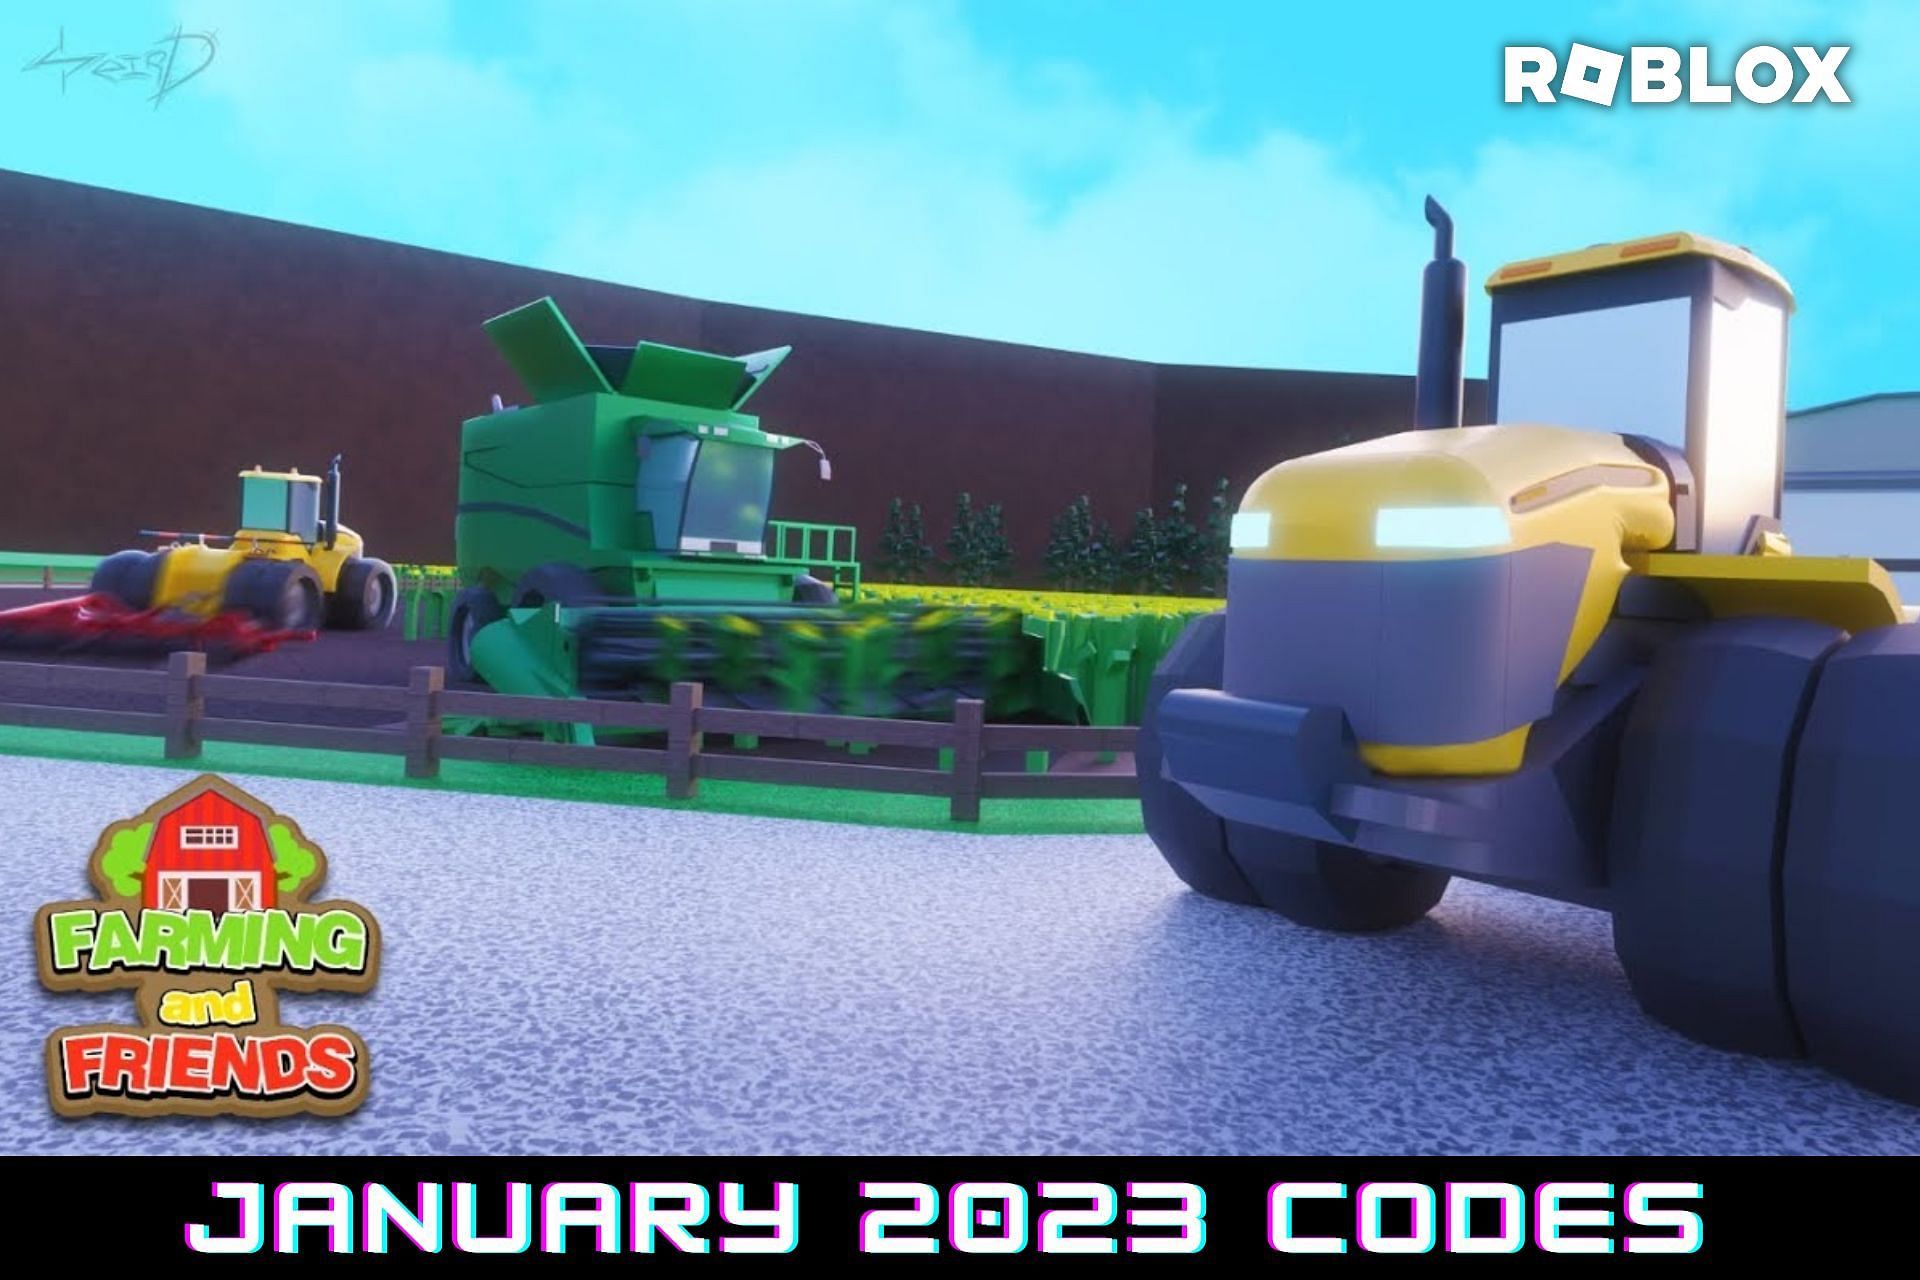 Roblox Farming and Friends Codes for January 2023 Free Coins